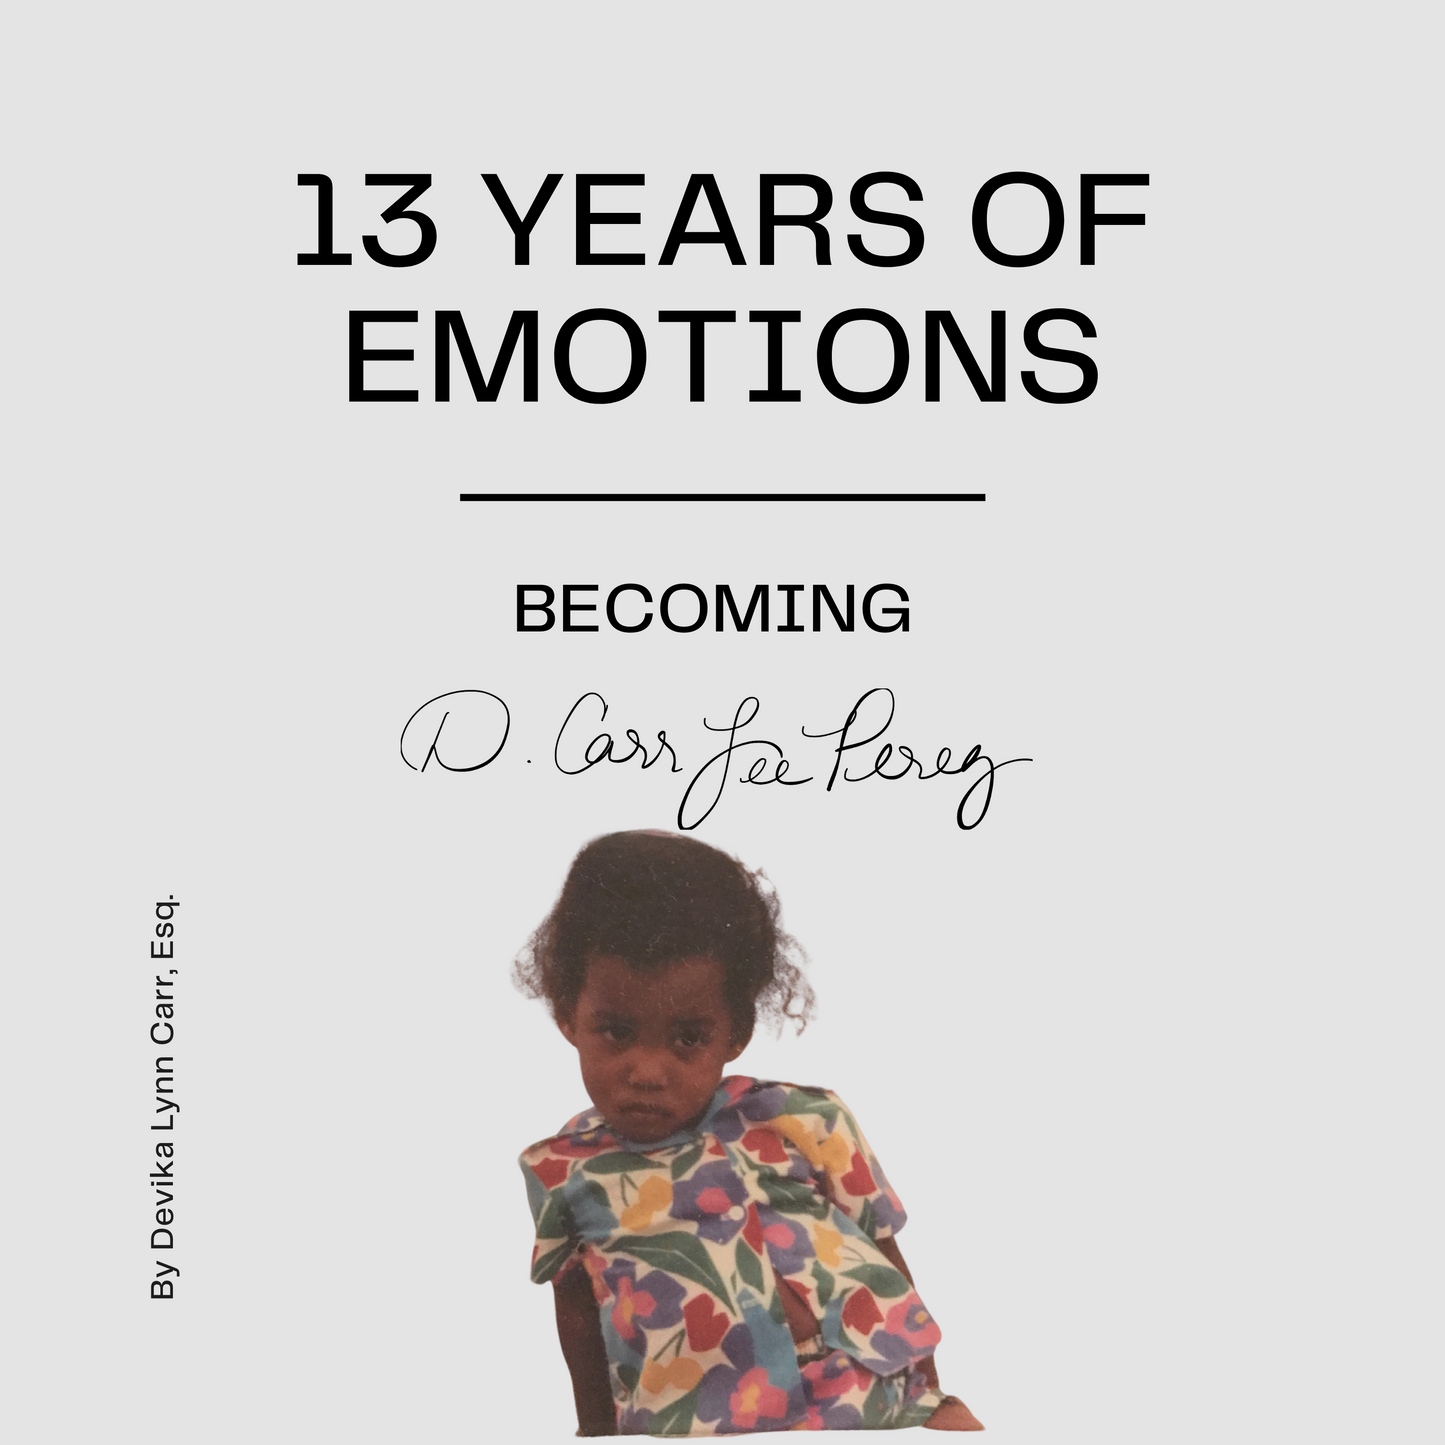 13 Years of Emotions: Becoming D. Carr Lee Perez, by Devika L. Carr, Esq.